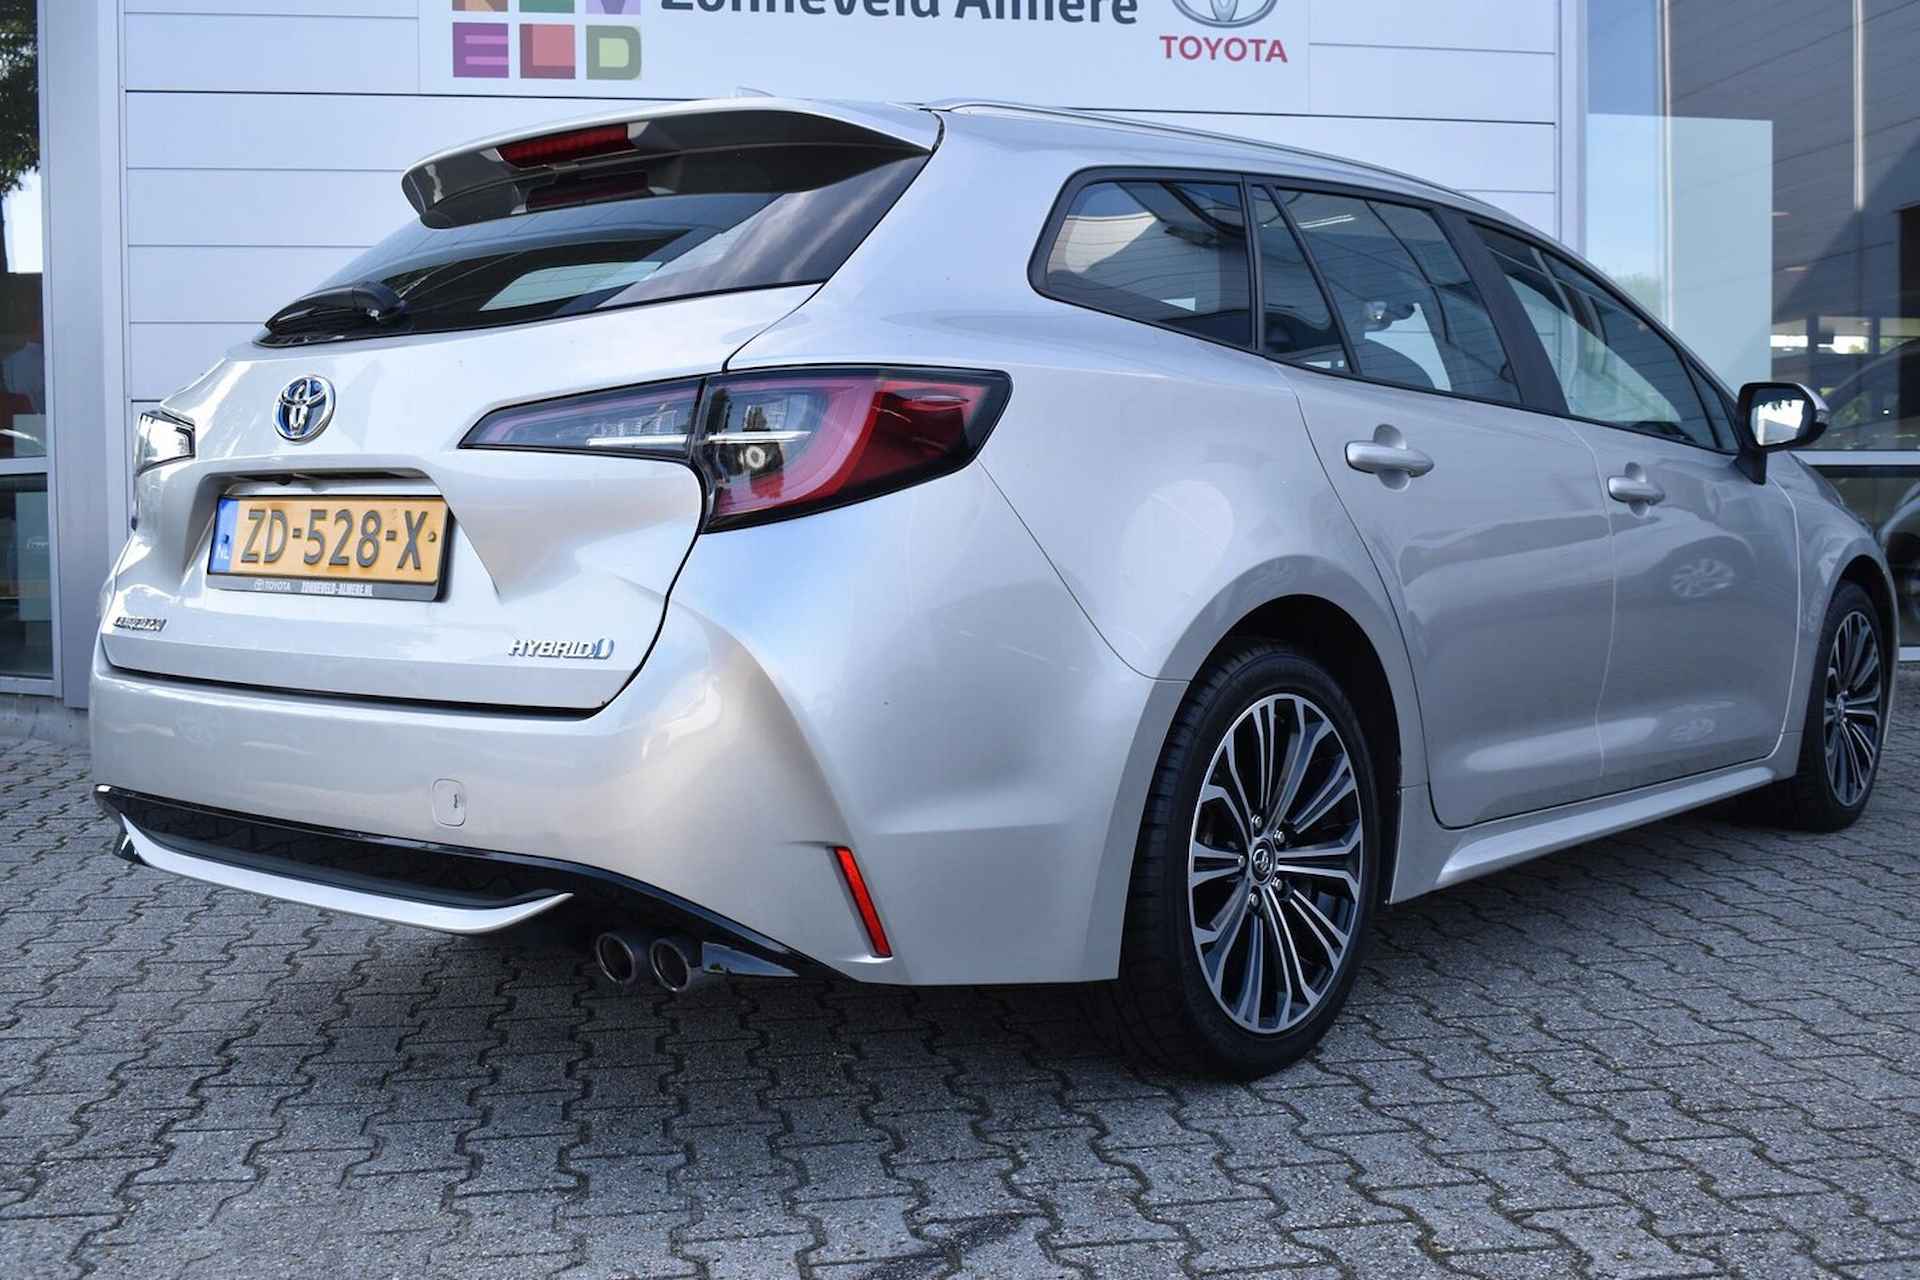 Toyota Corolla Touring Sports 2.0 Hybrid First Edition - 8/26